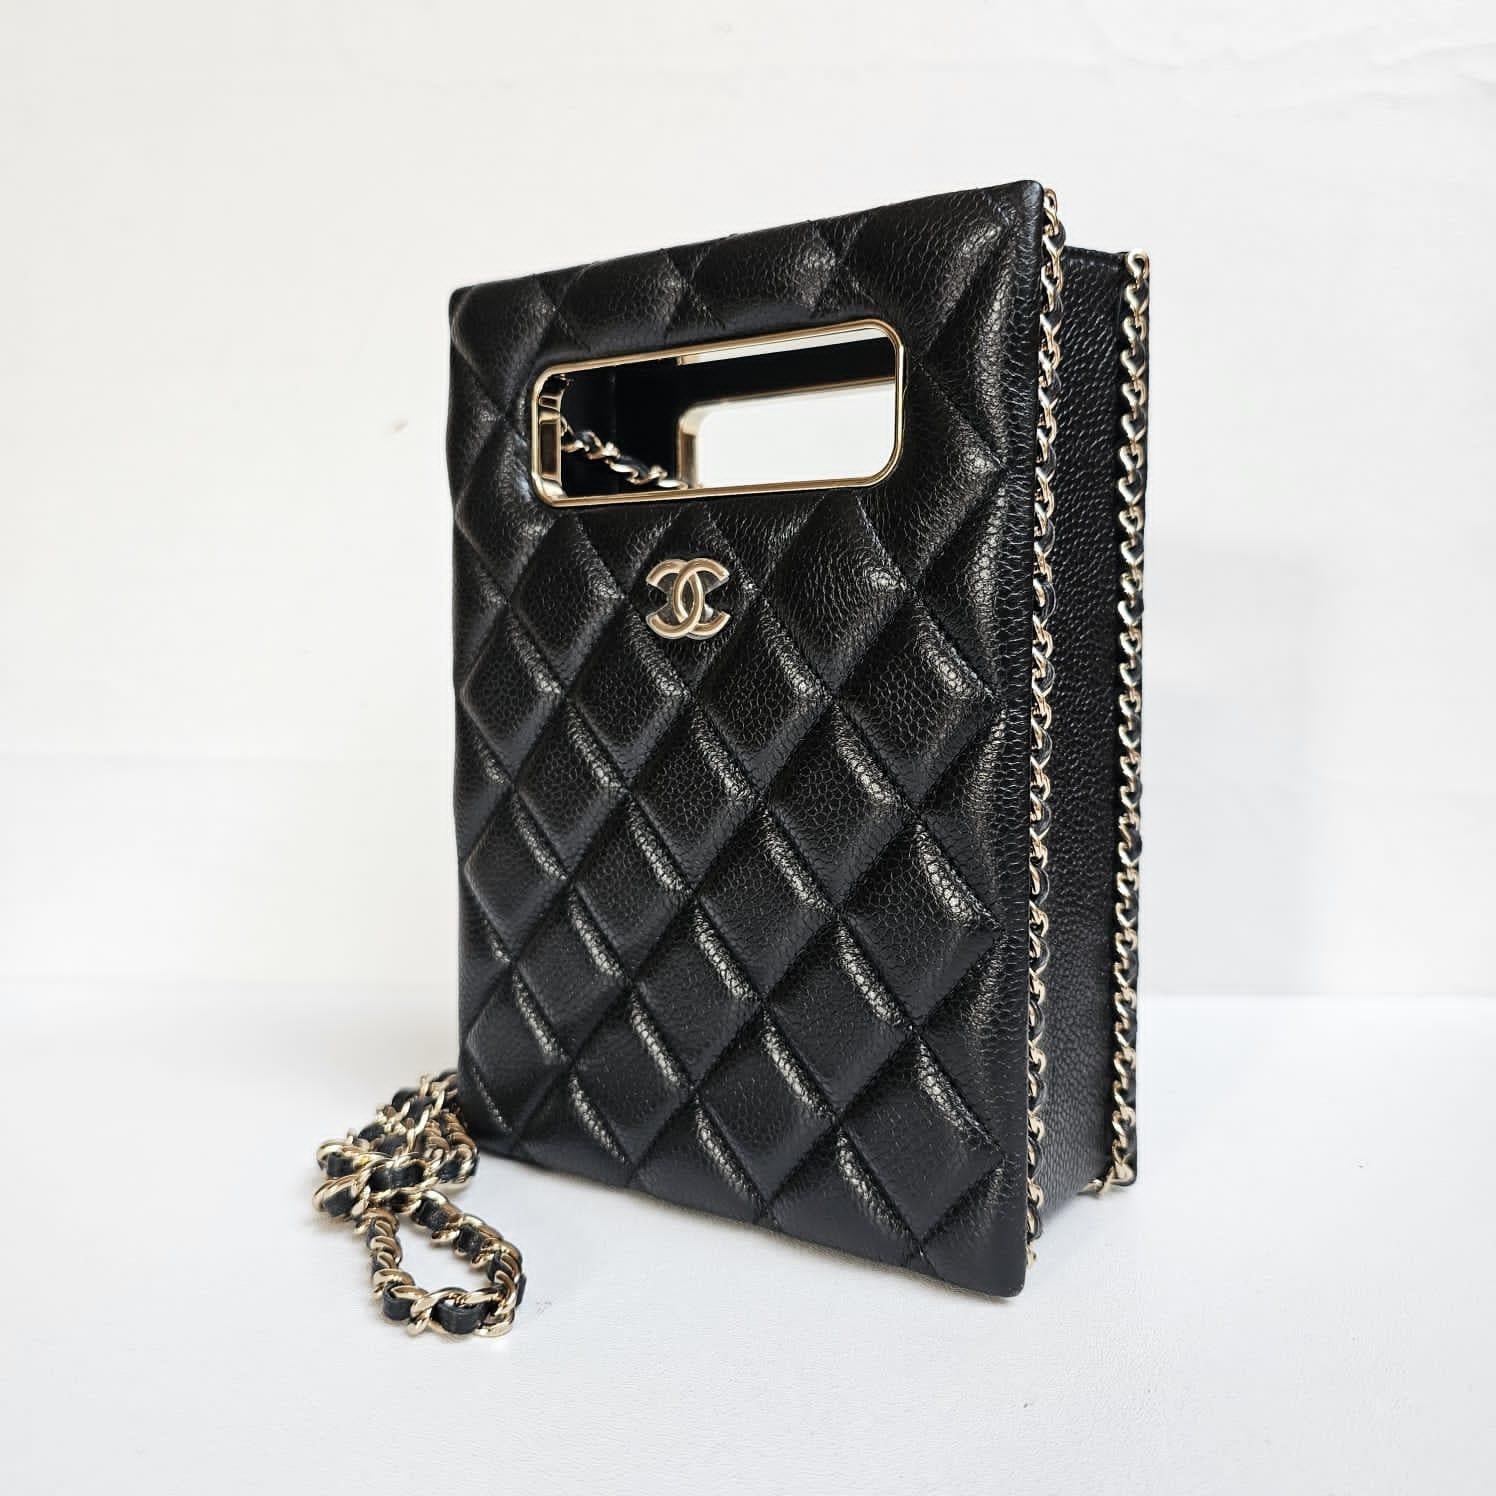 Chanel Black Caviar Quilted Evening Box Bag For Sale 5